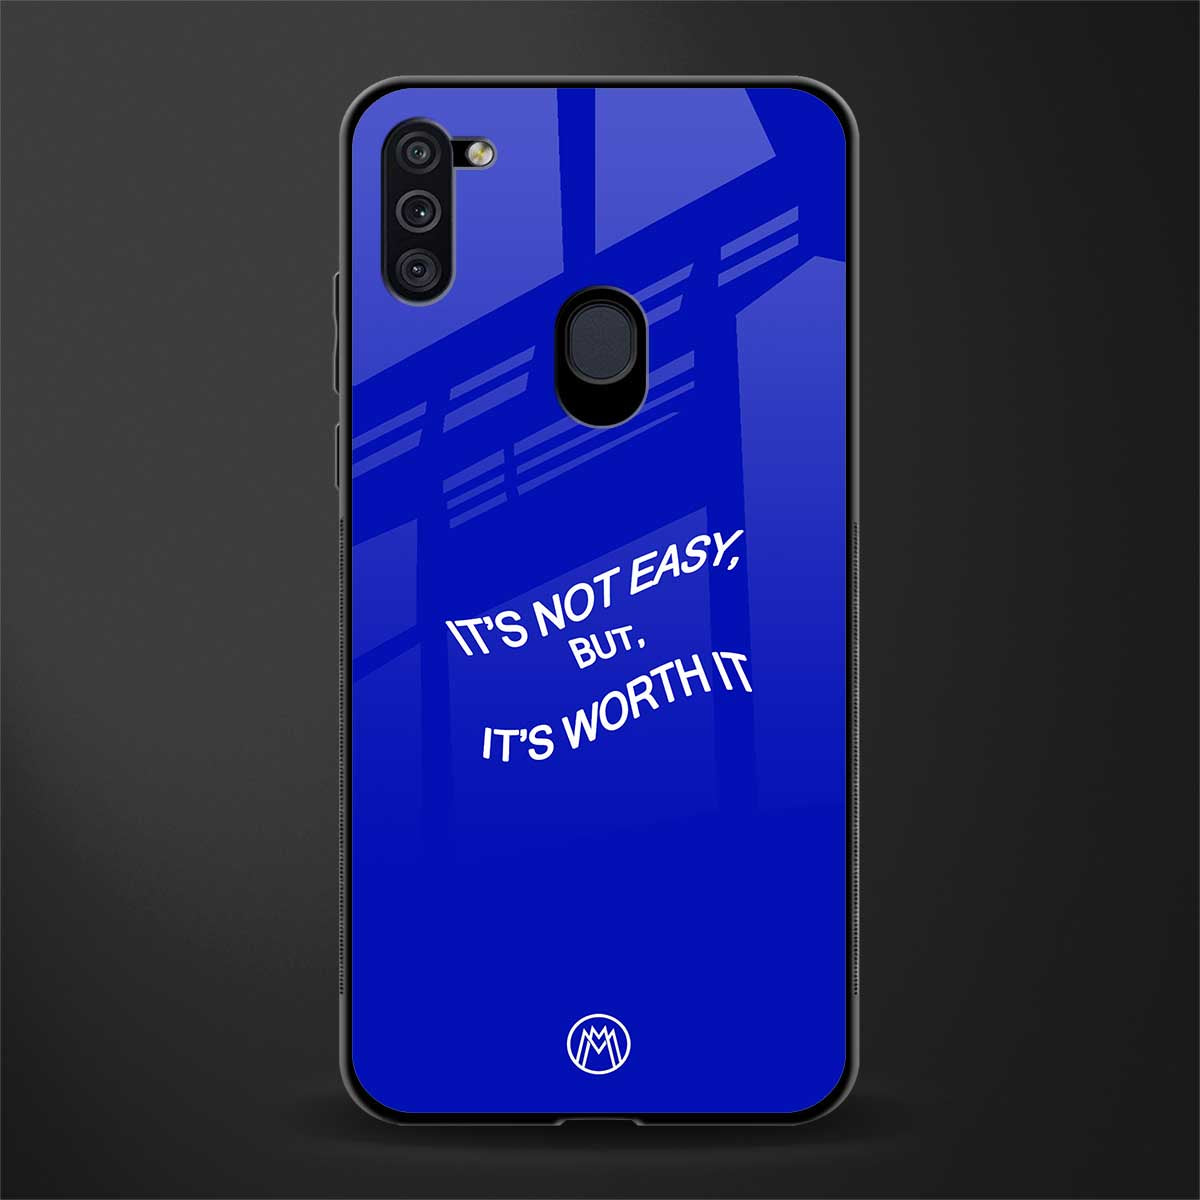 worth it glass case for samsung a11 image